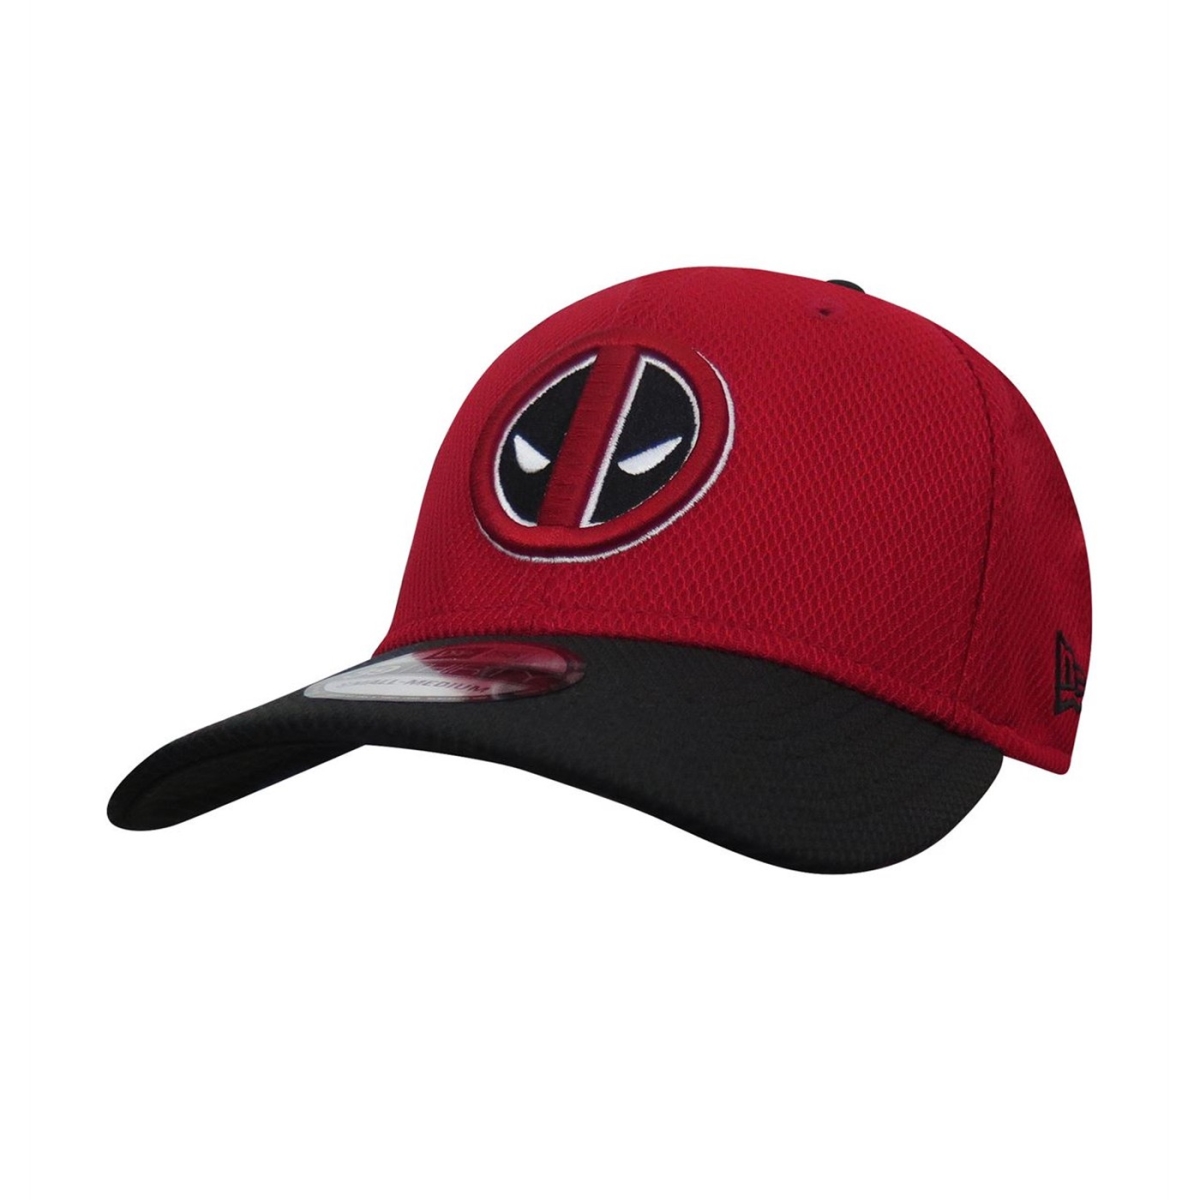 Picture of Deadpool capdprbsym39thirty-m-l-Medium-Large Deadpool Symbol Red & Black 39 Thirty Fitted Hat - Medium & Large